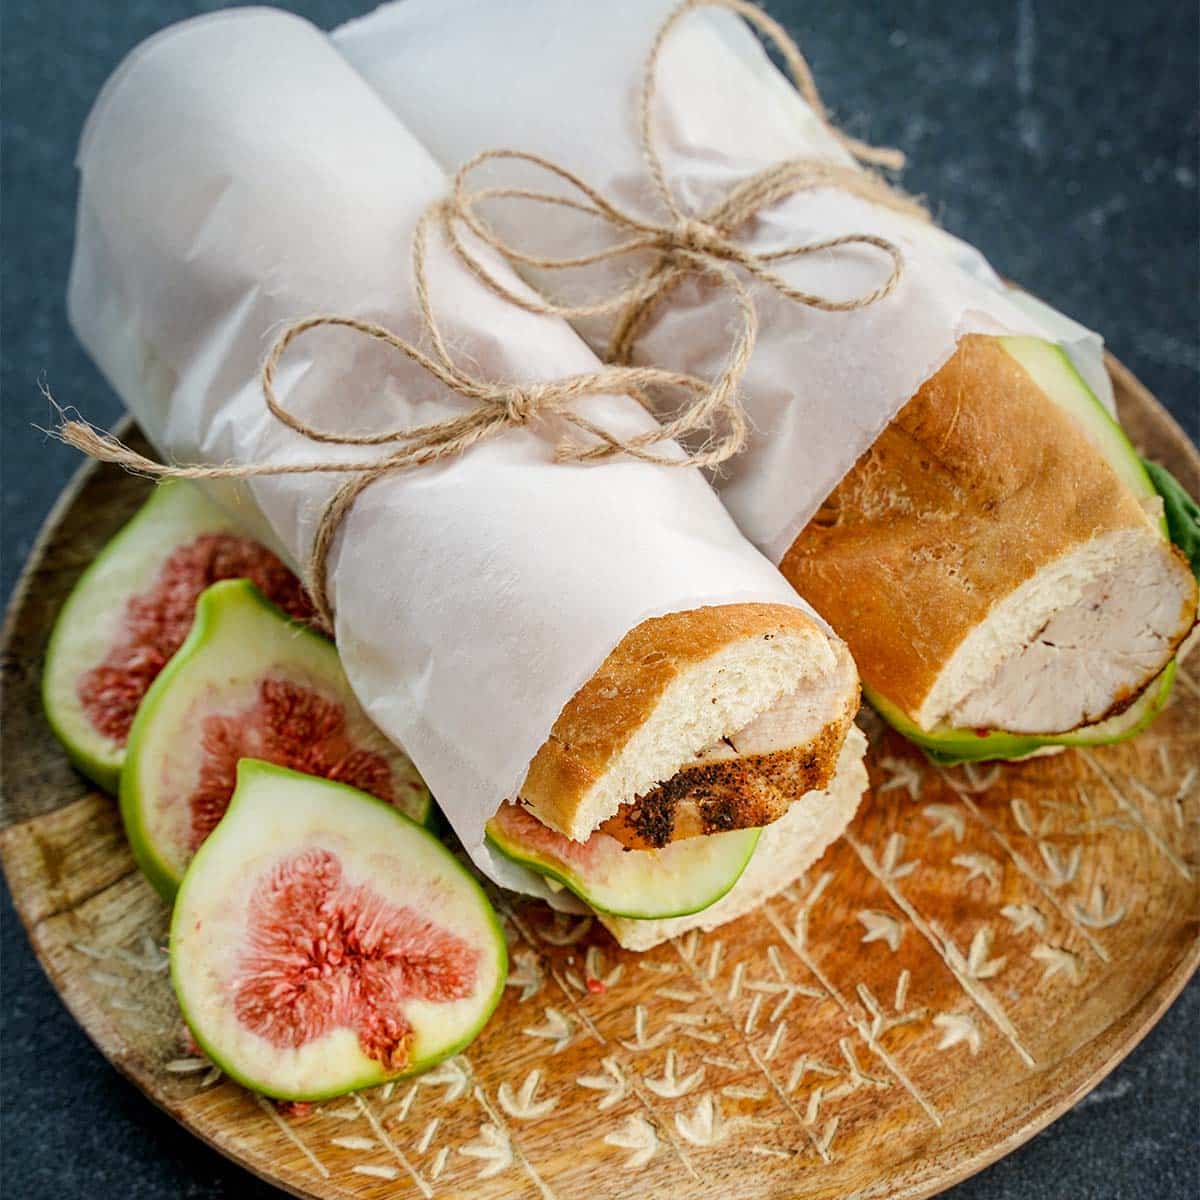 Wrapped in parchment paper, Fig and Chicken Baguette Sandwich.